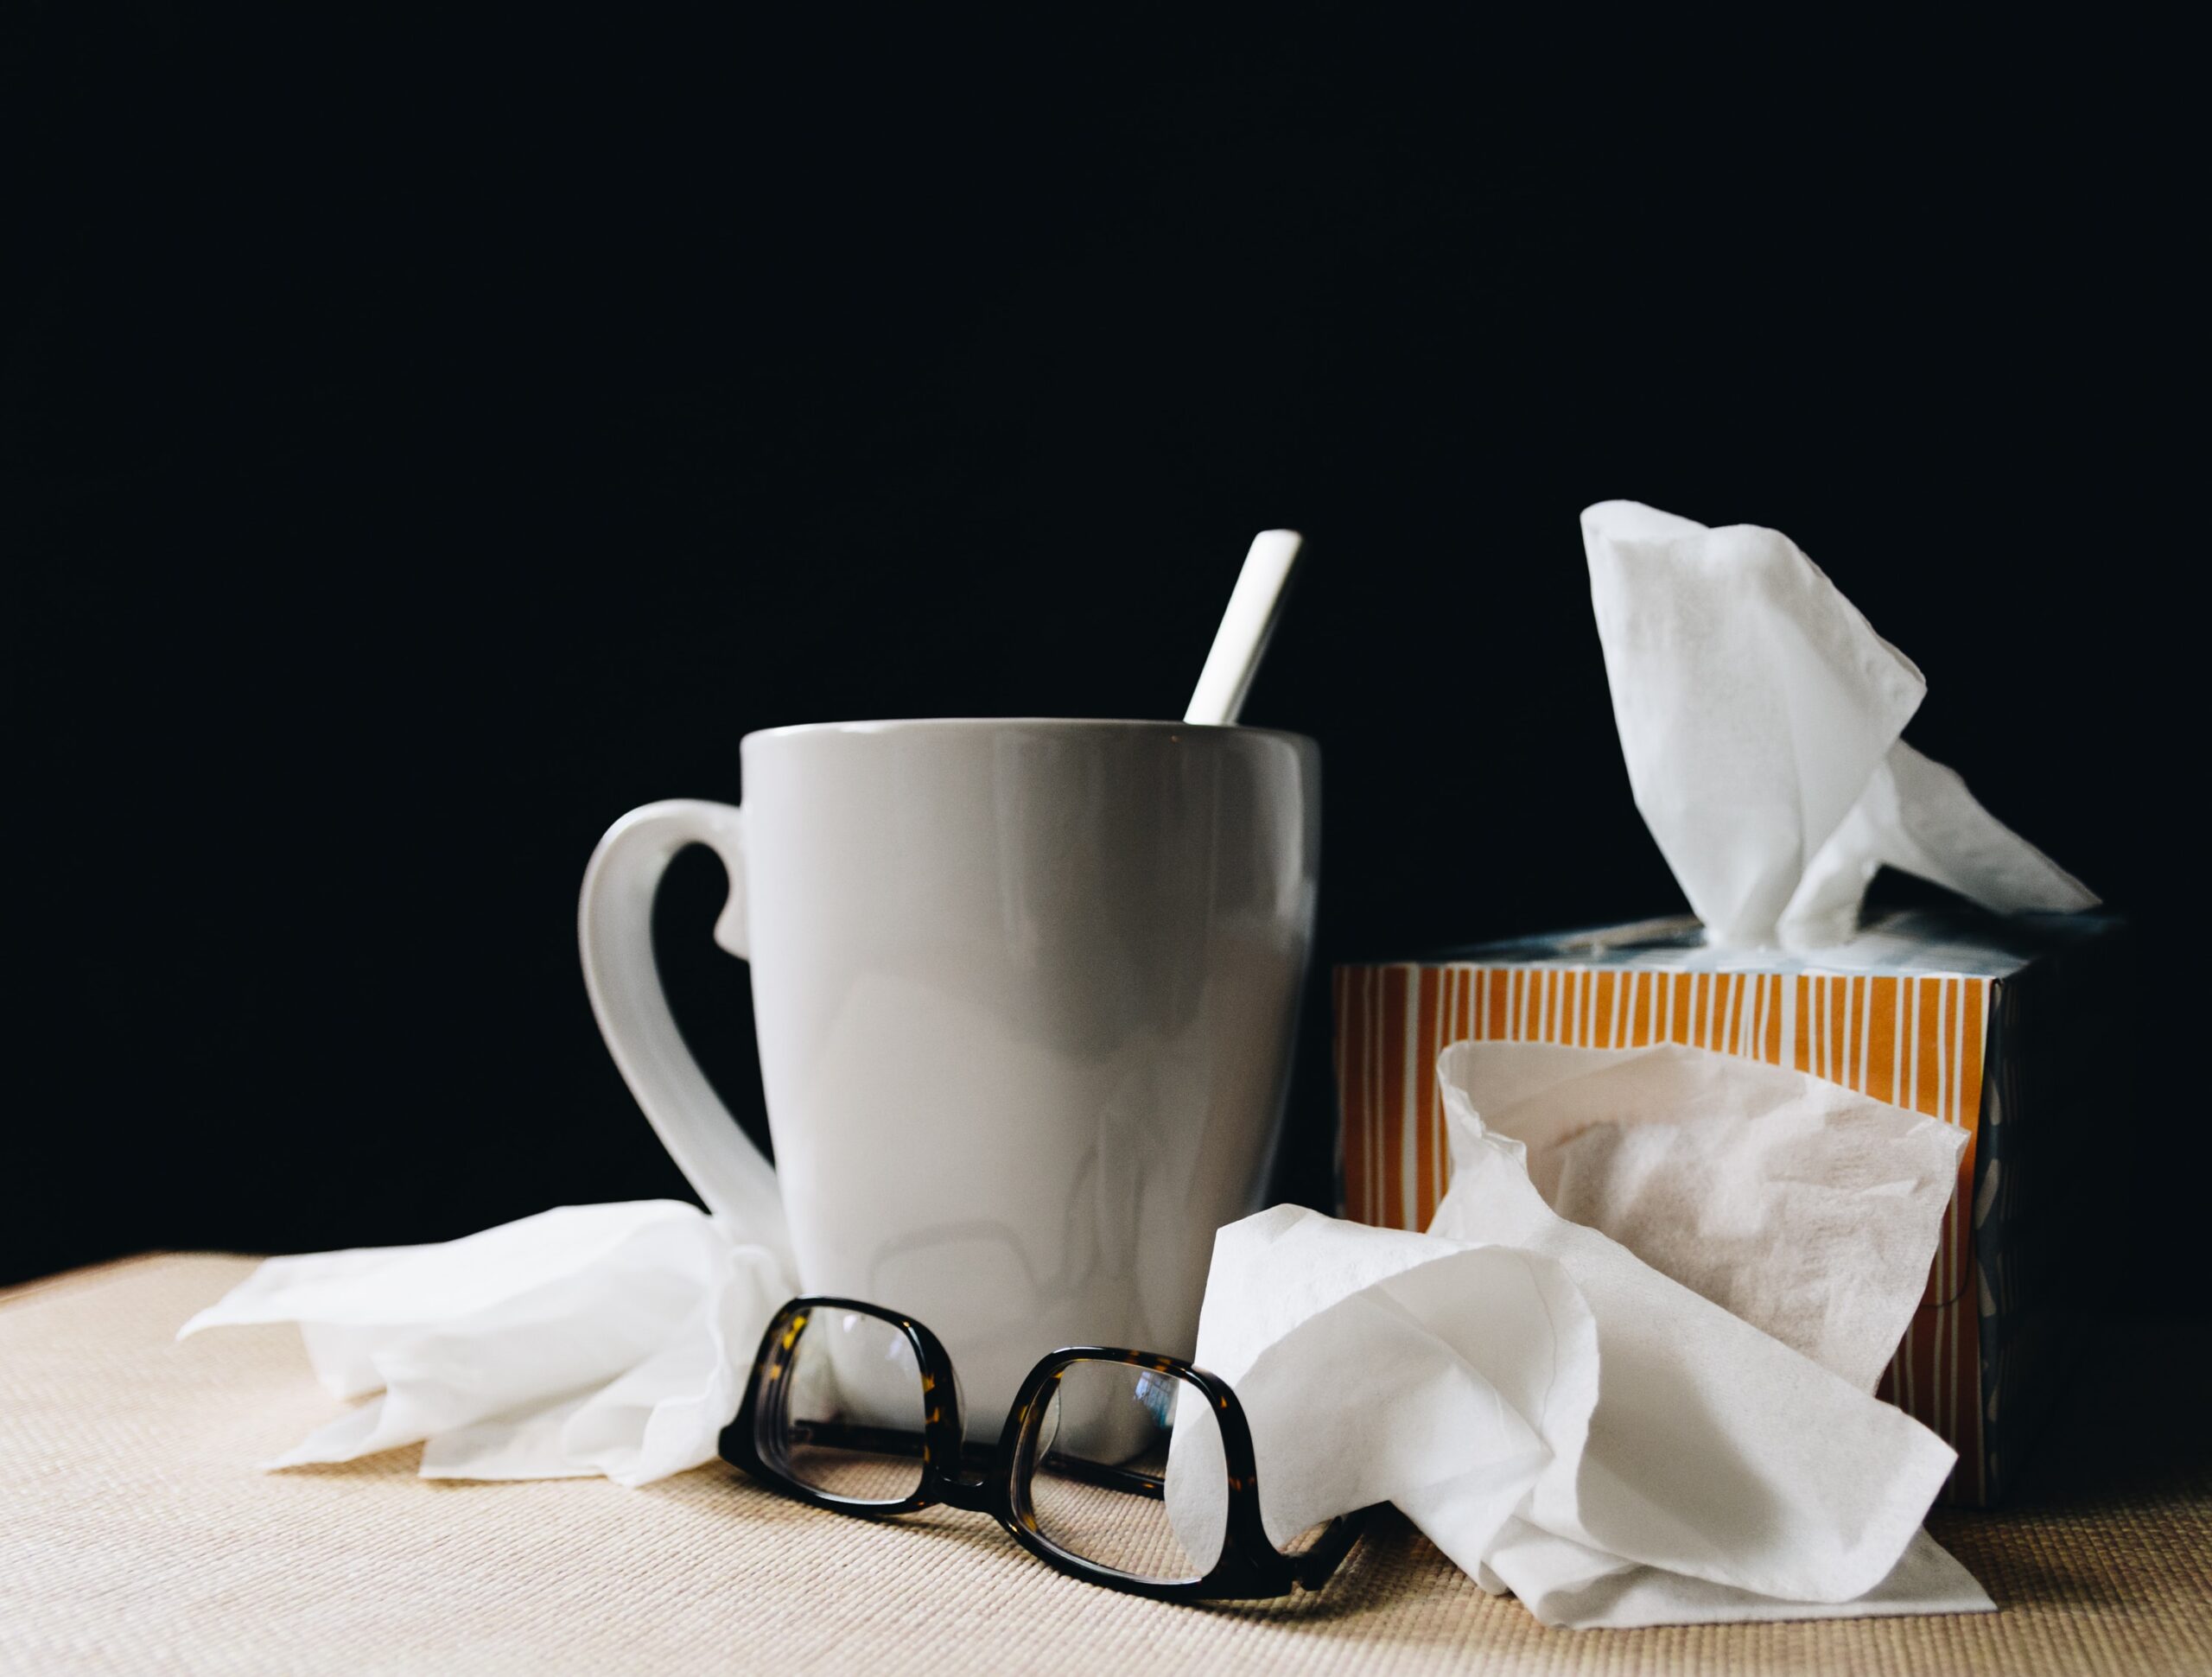 How to Clean After the Flu's featured image